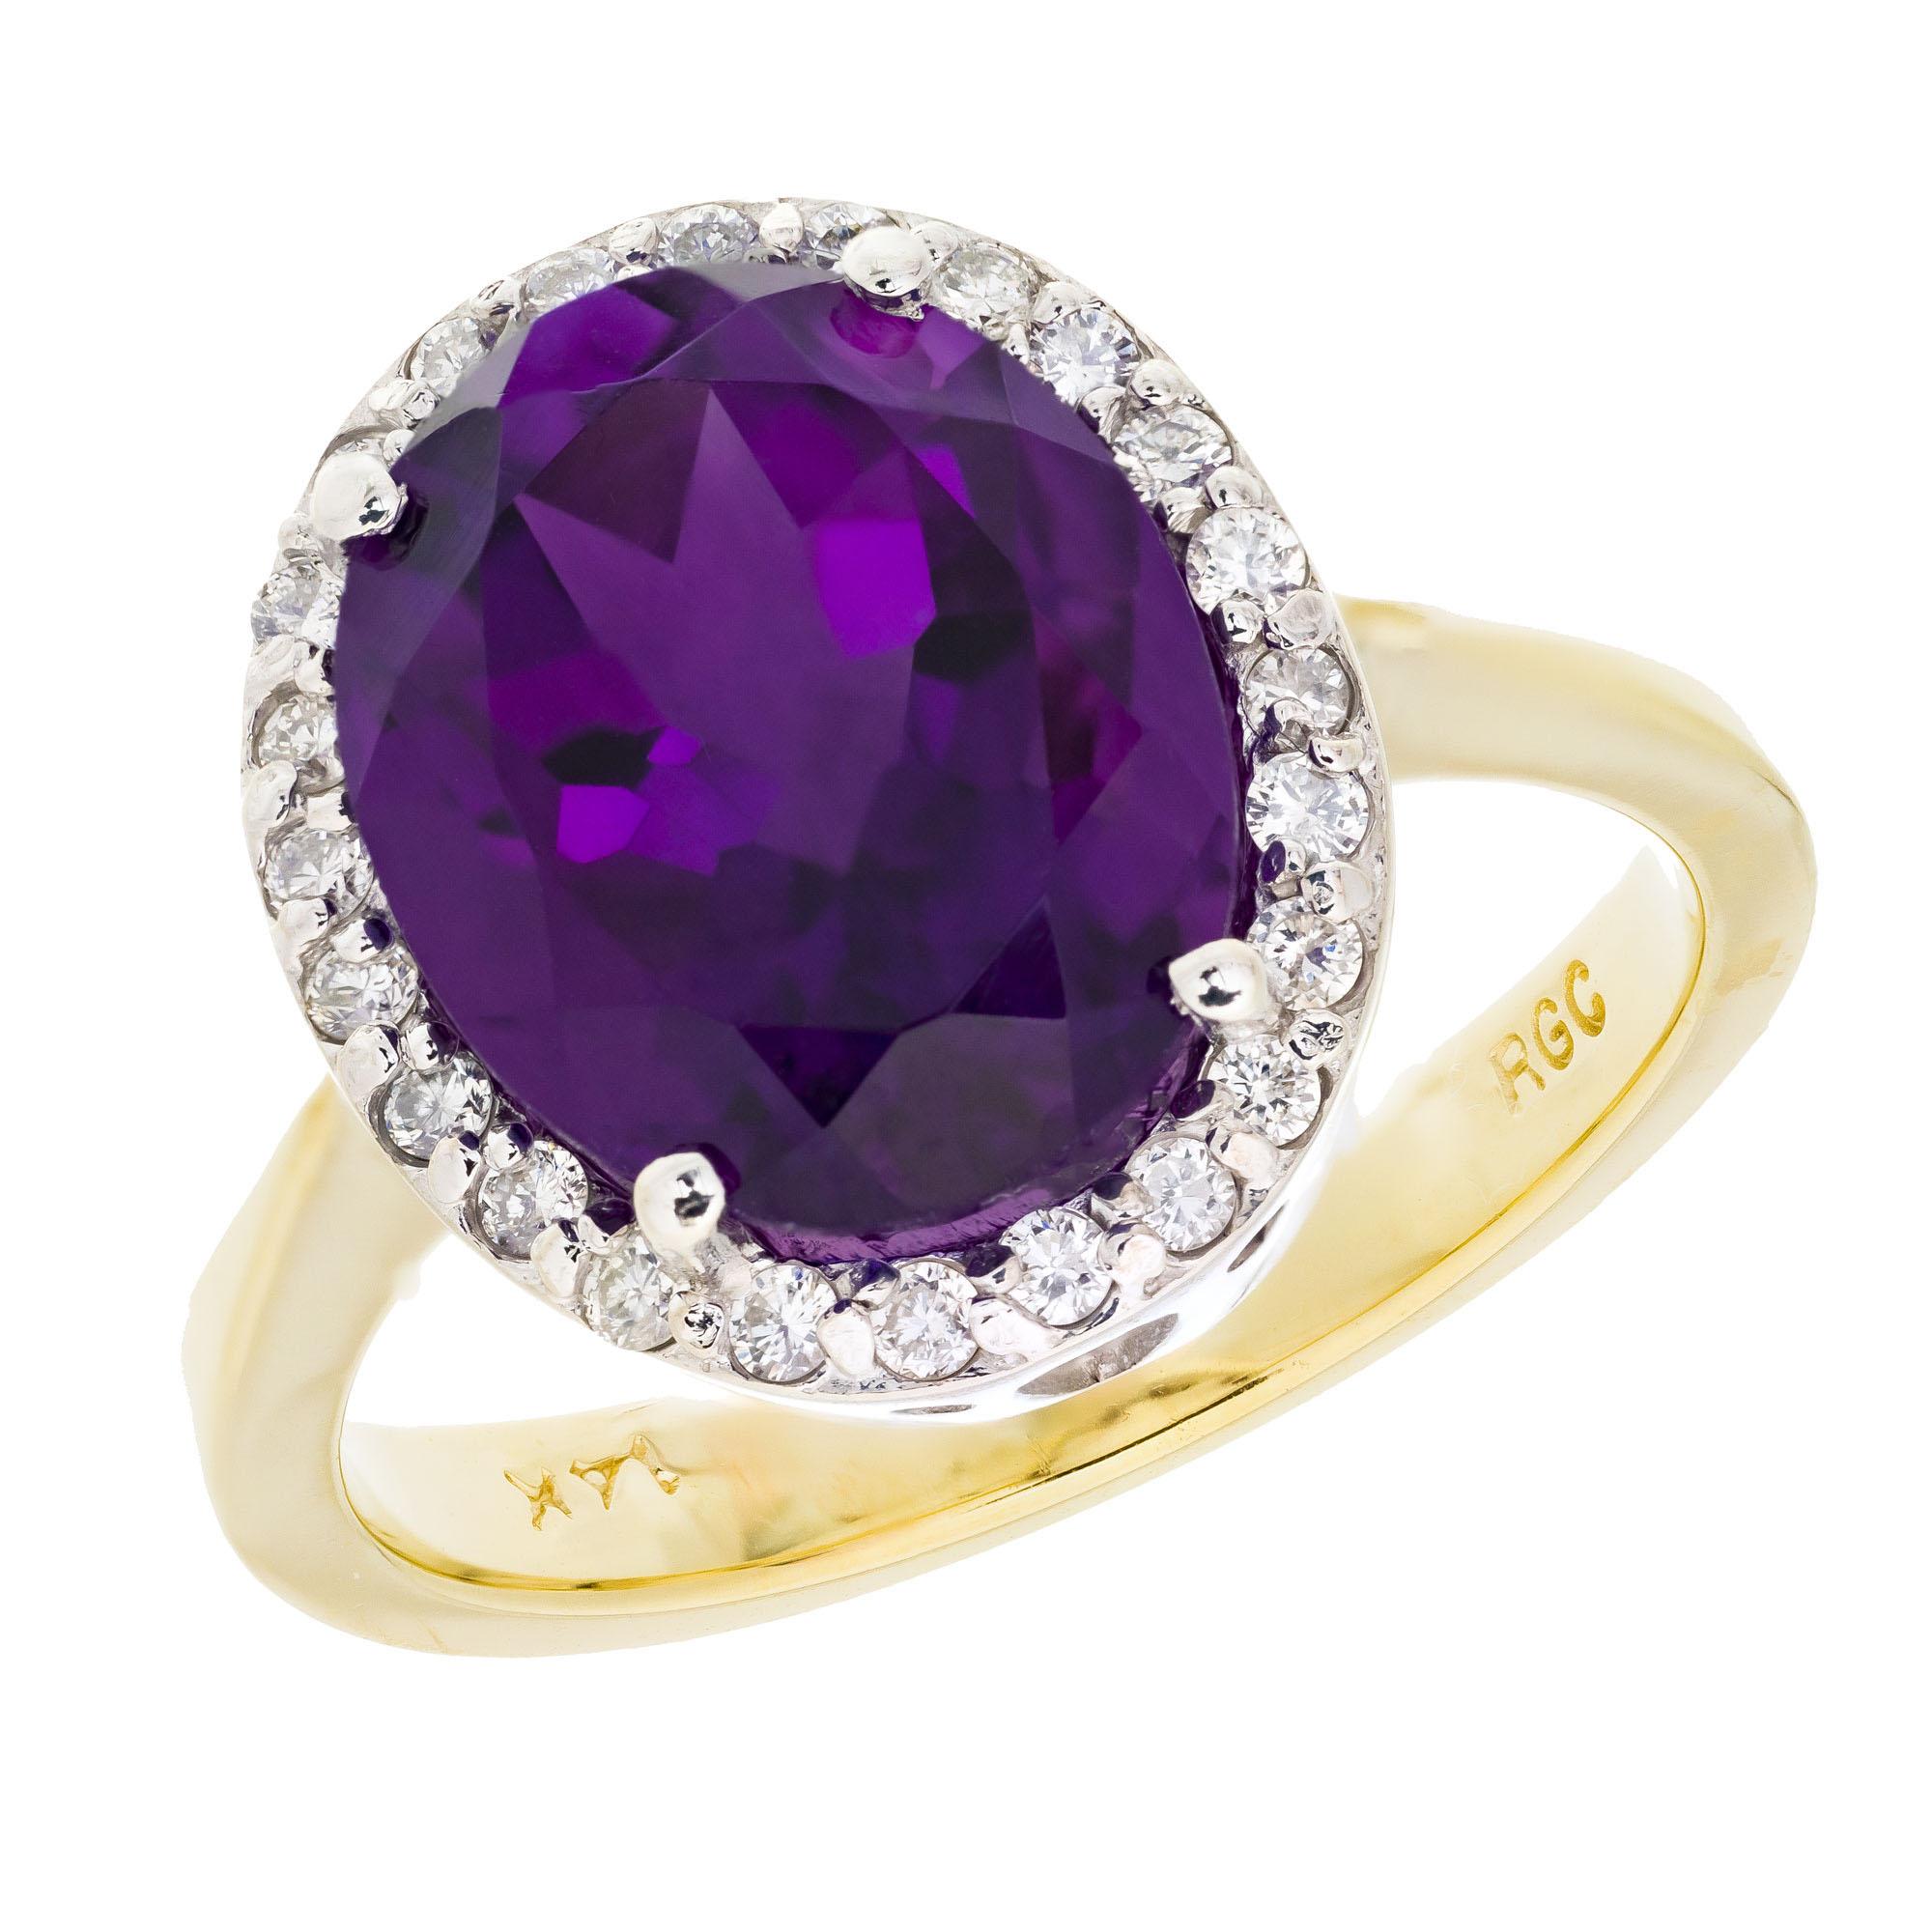 Amethyst and diamond cocktail ring. 4.50ct oval center amethyst with a halo of 24 round full cut diamonds in a 14k yellow gold setting with a white gold top.

1 gem reddish purple oval Amethyst, approx. total weight 4.50cts, 12 x 10mm
24 round full